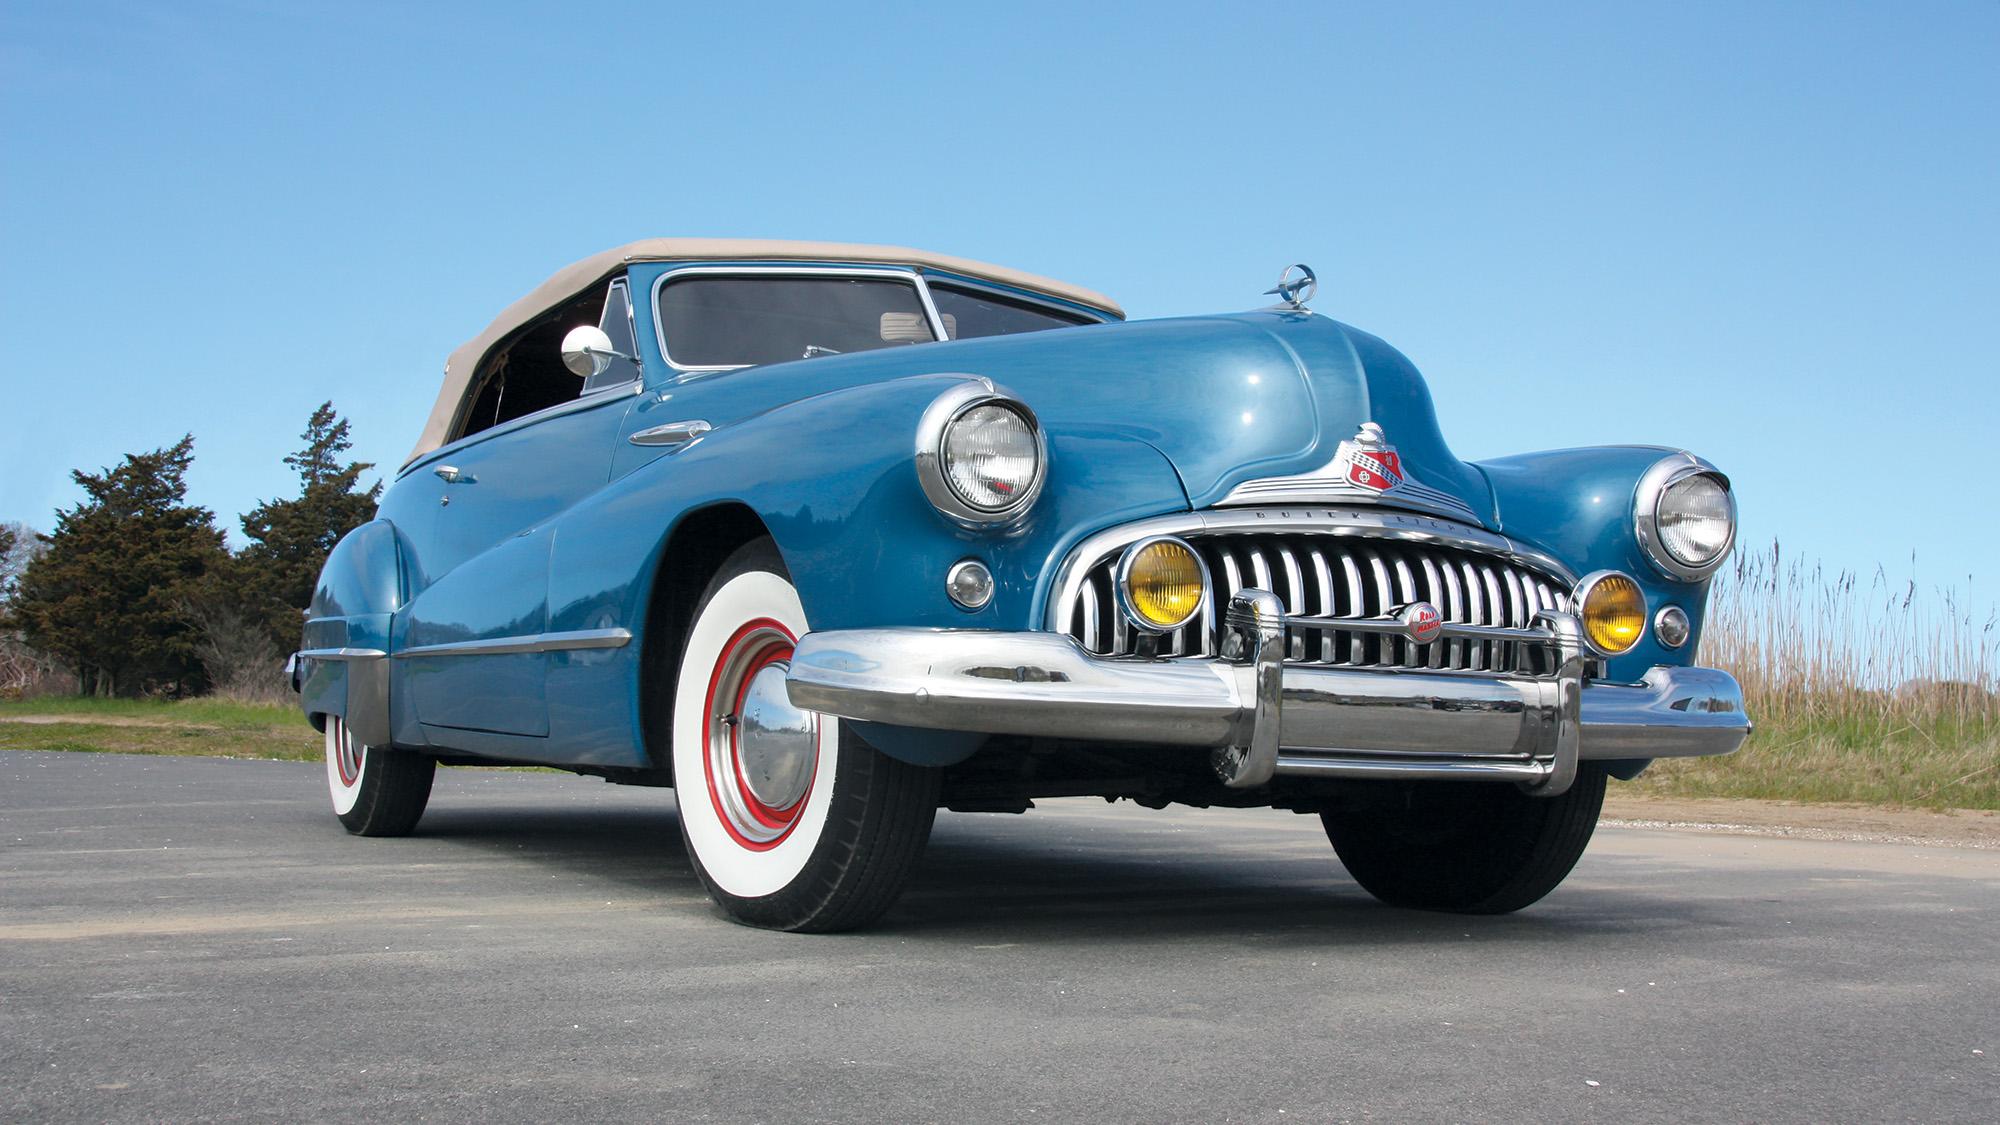 This 1947 Buick Roadmaster convertible started out as the best of three separate cars